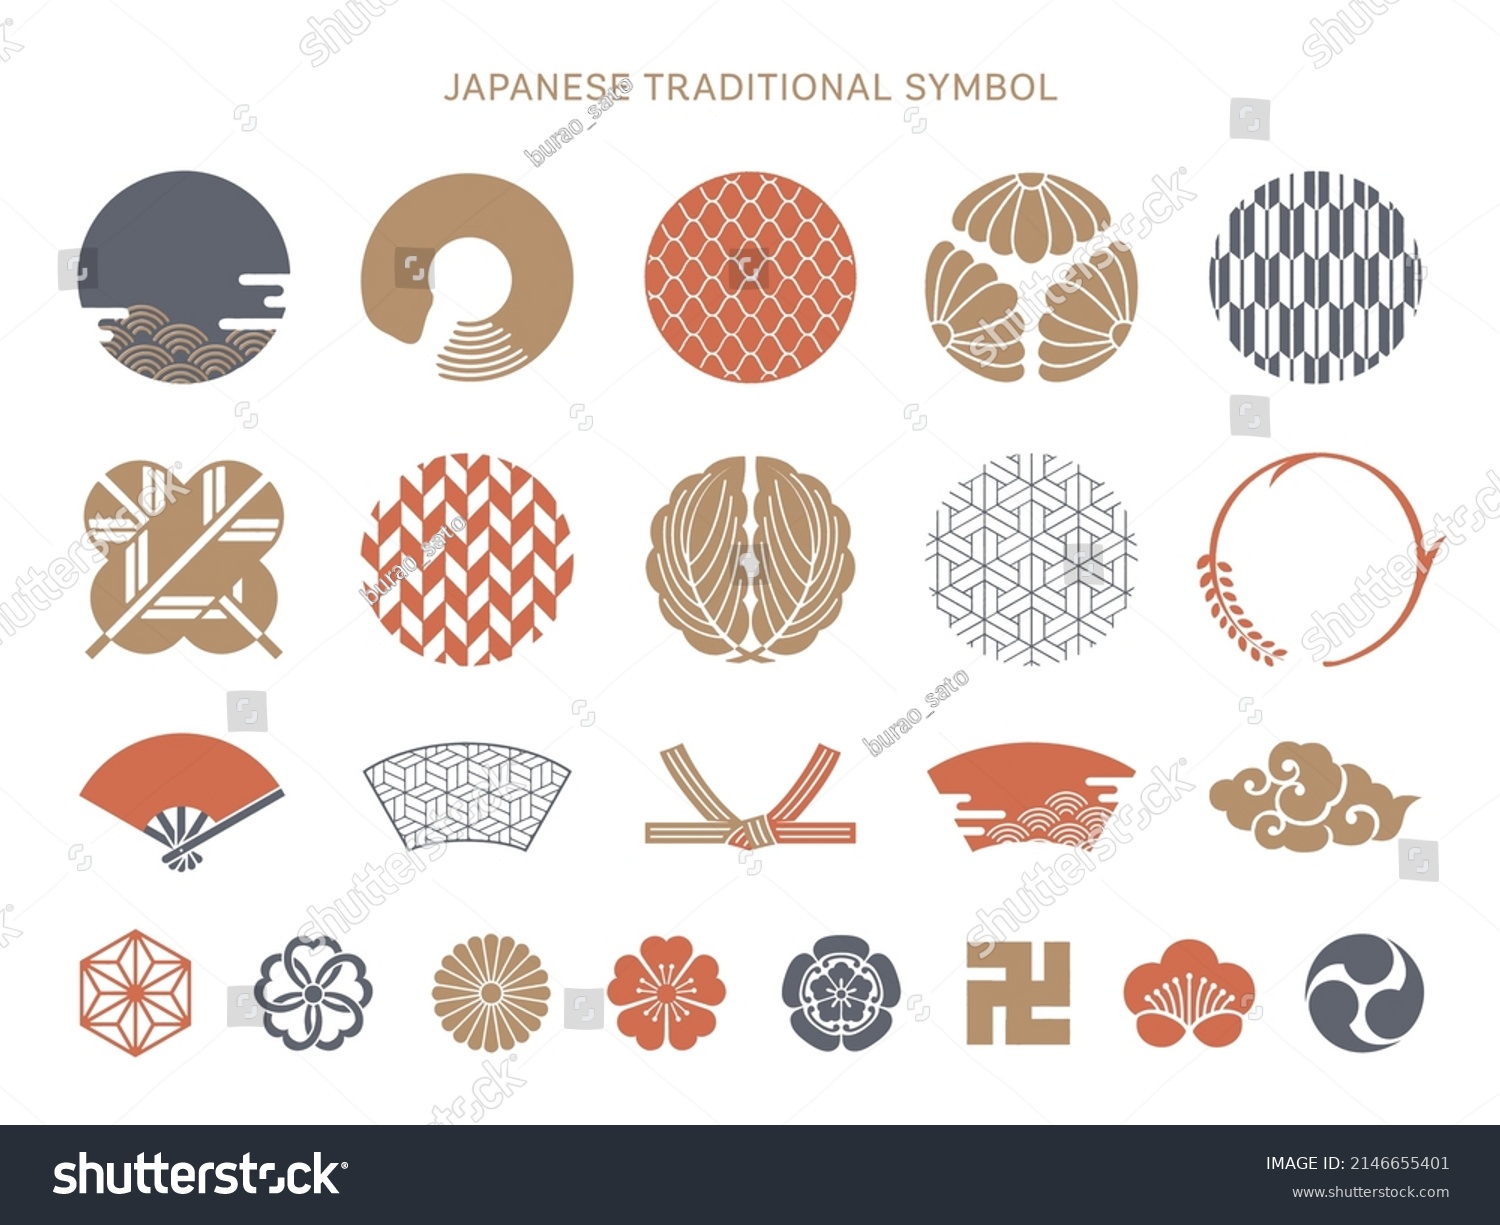 Japanese traditional icon and symbol collection. #2146655401